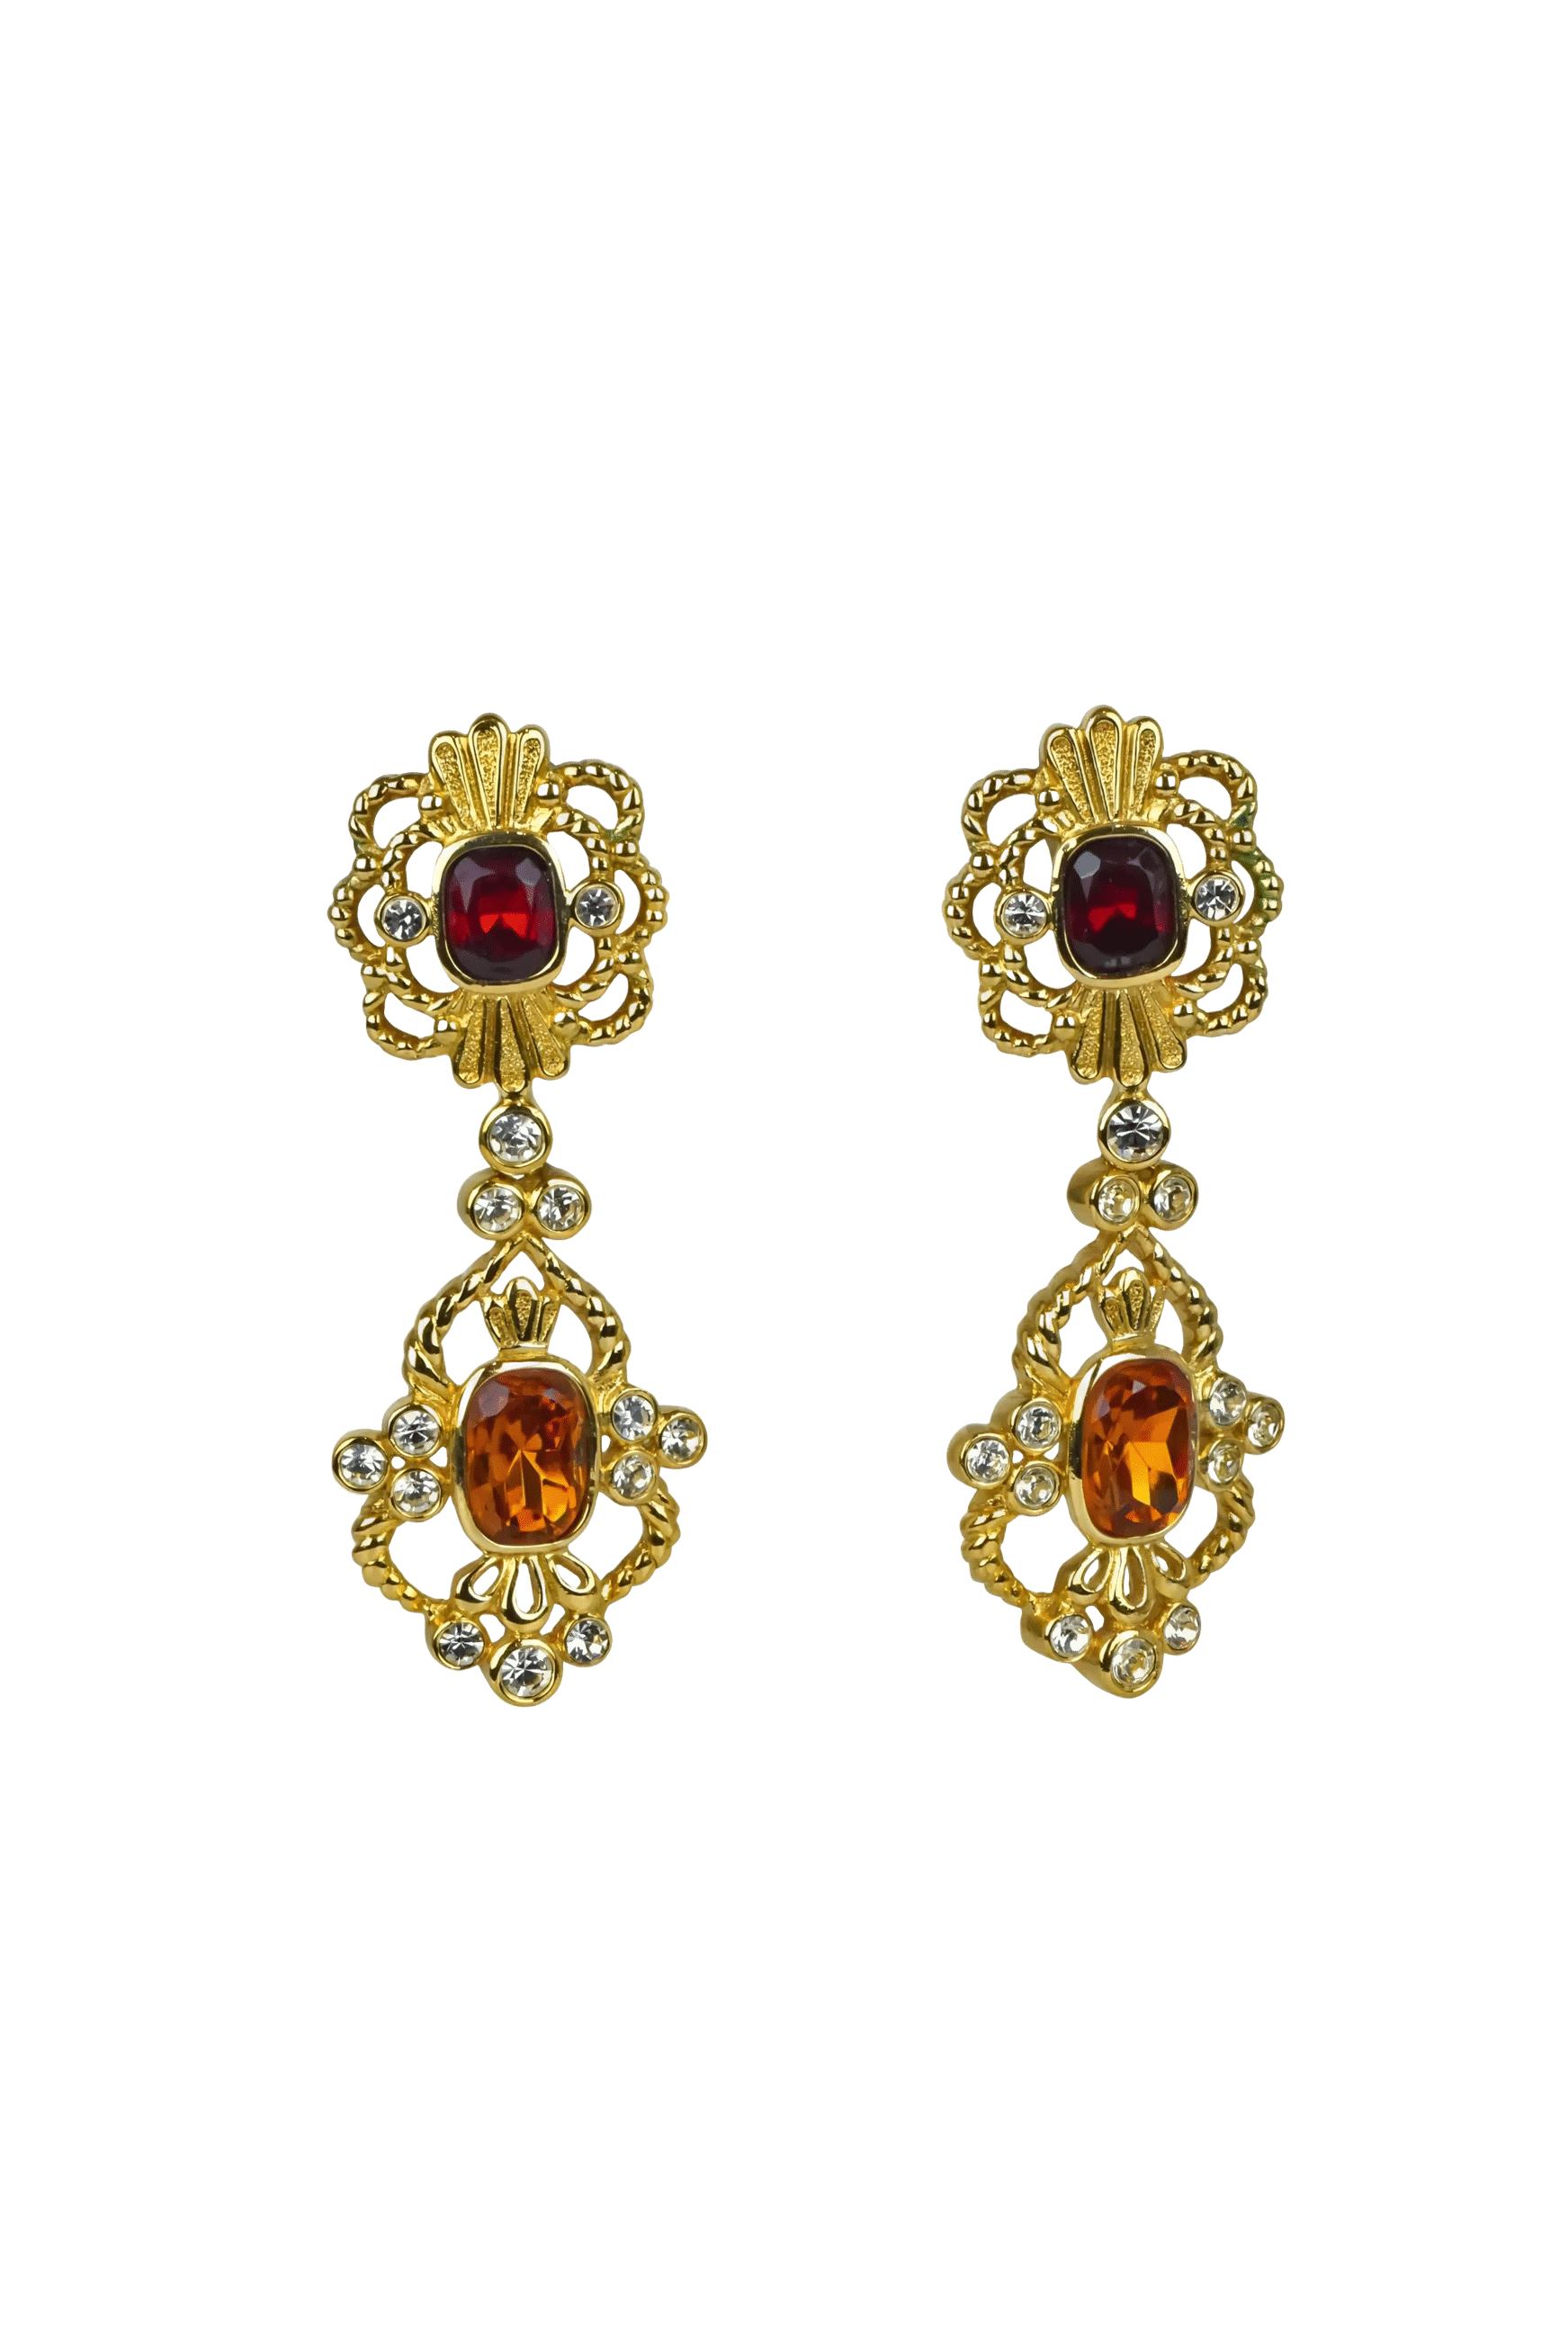 Christian Dior Rare Vintage Crystal Embellished Earrings 1960's-1970's - Foxy Couture Carmel